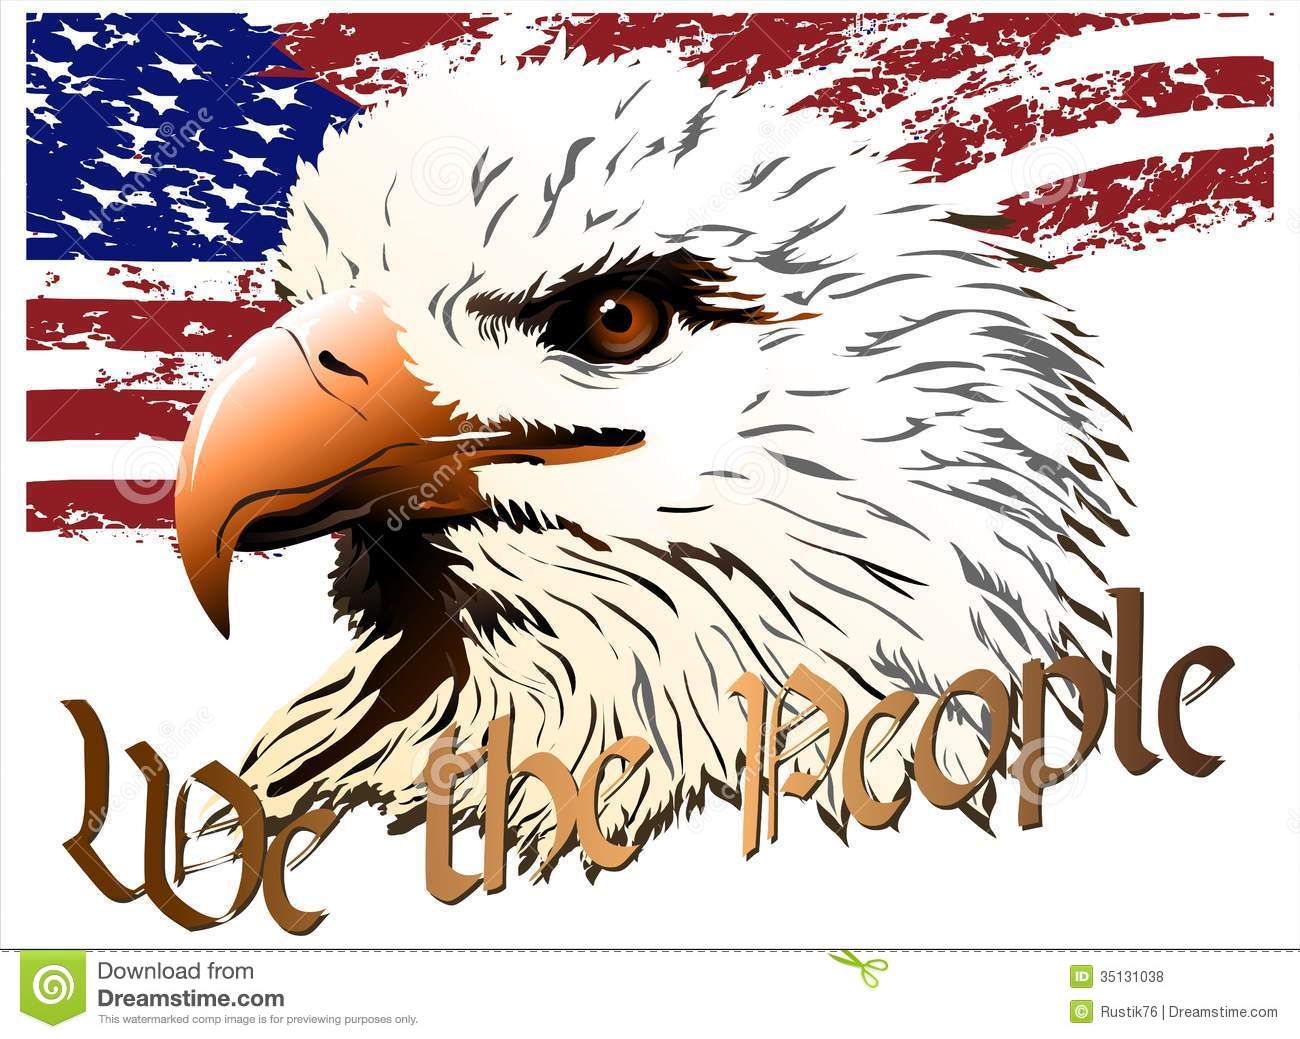 The Eagle as Symbol for the United States